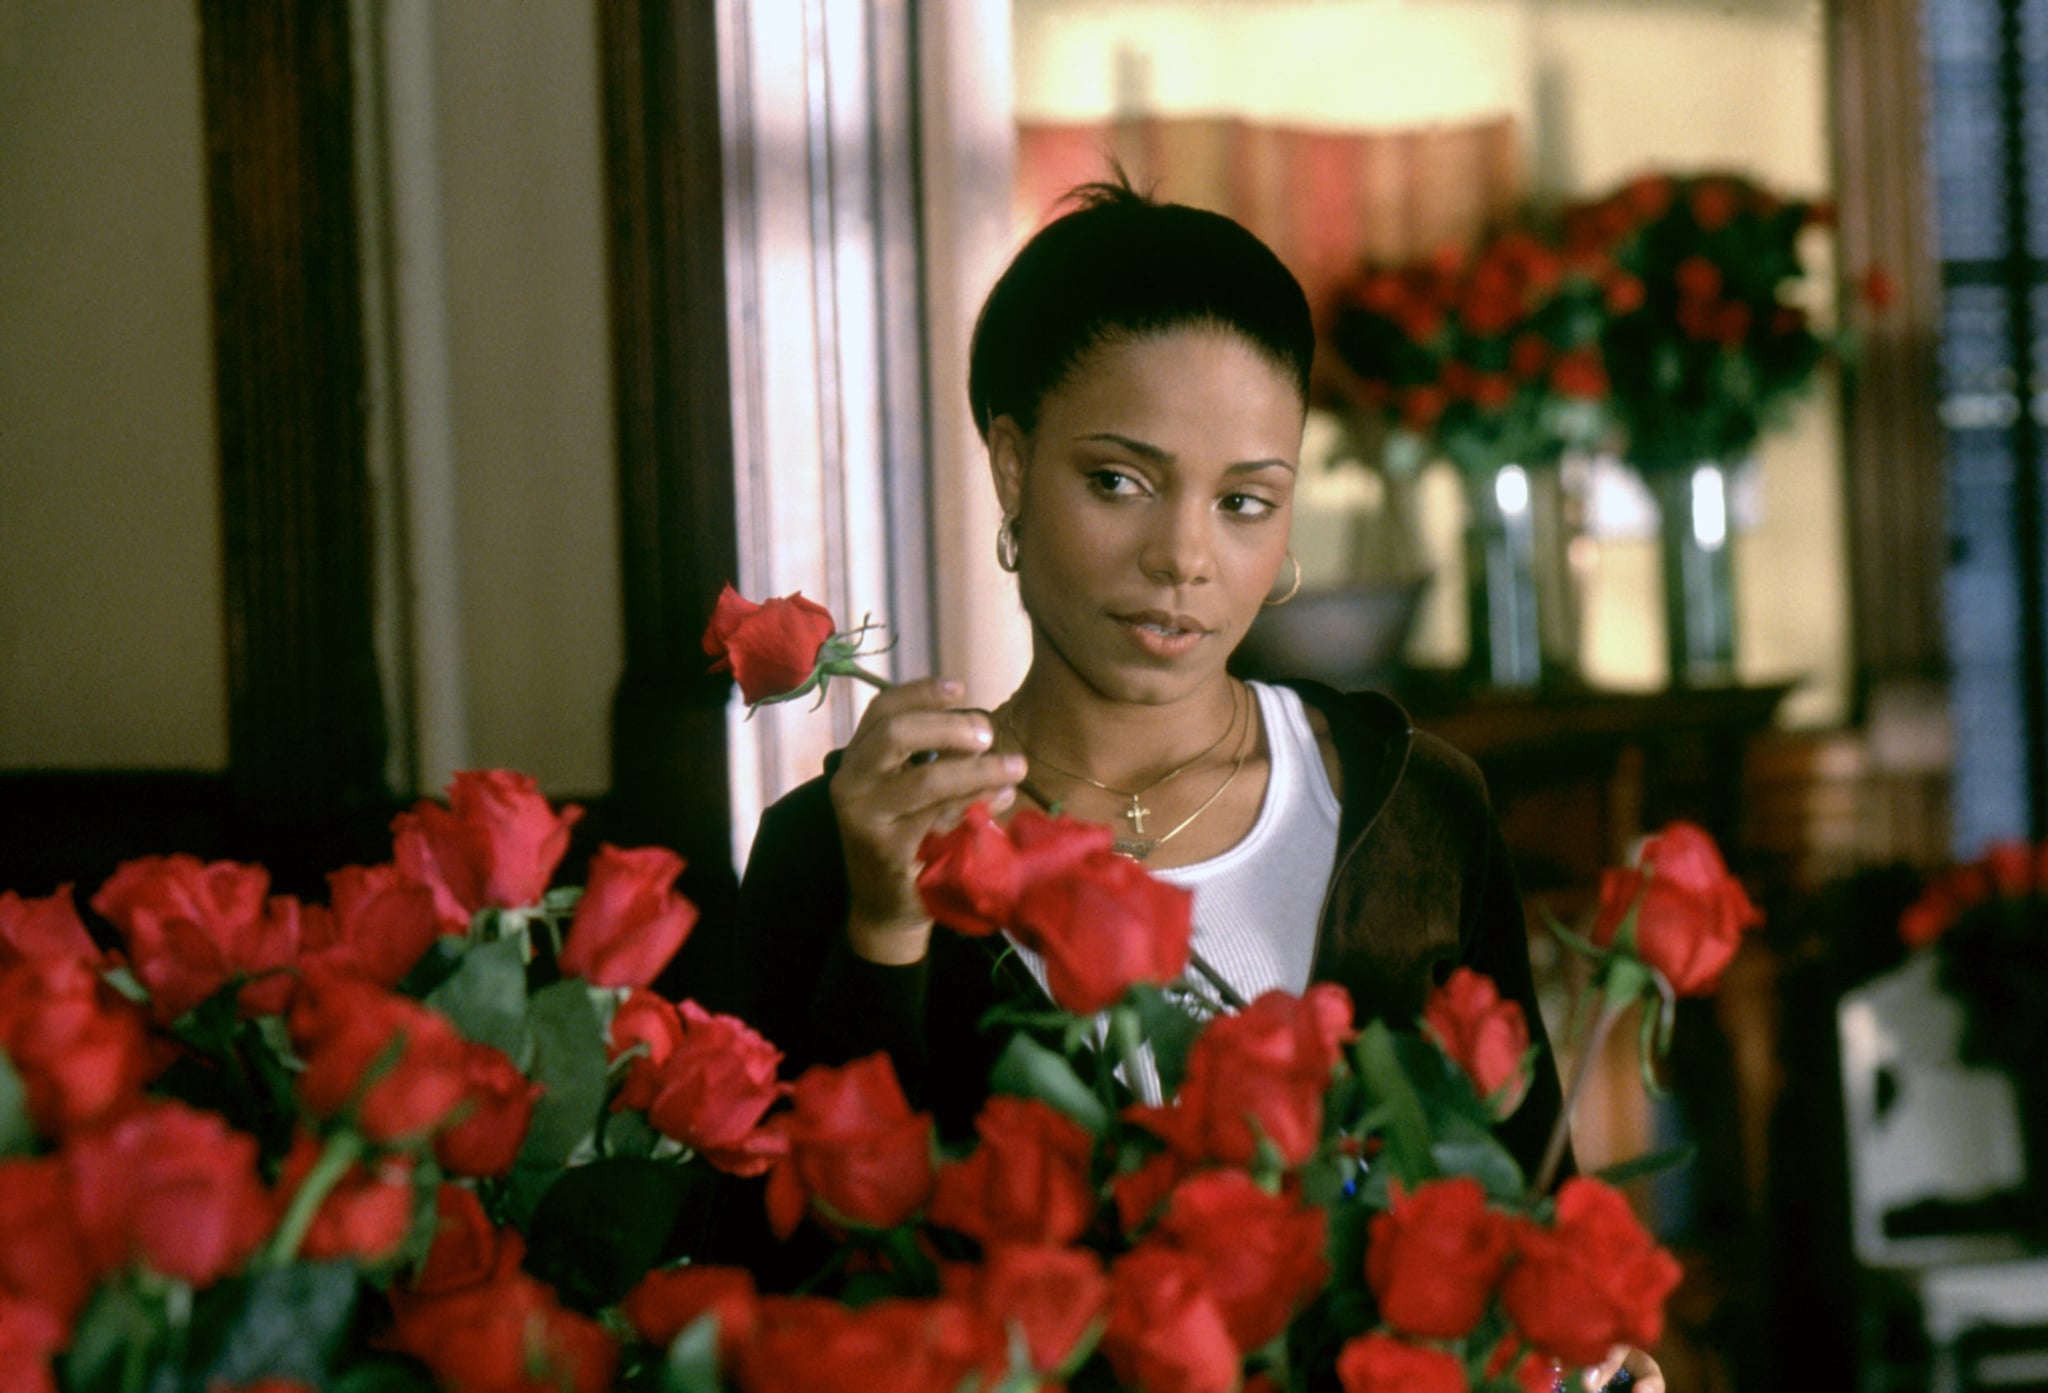 BROWN SUGAR, Sanaa Lathan, 2002, TM & Copyright (c) 20th Century Fox Film Corp. All rights reserved.